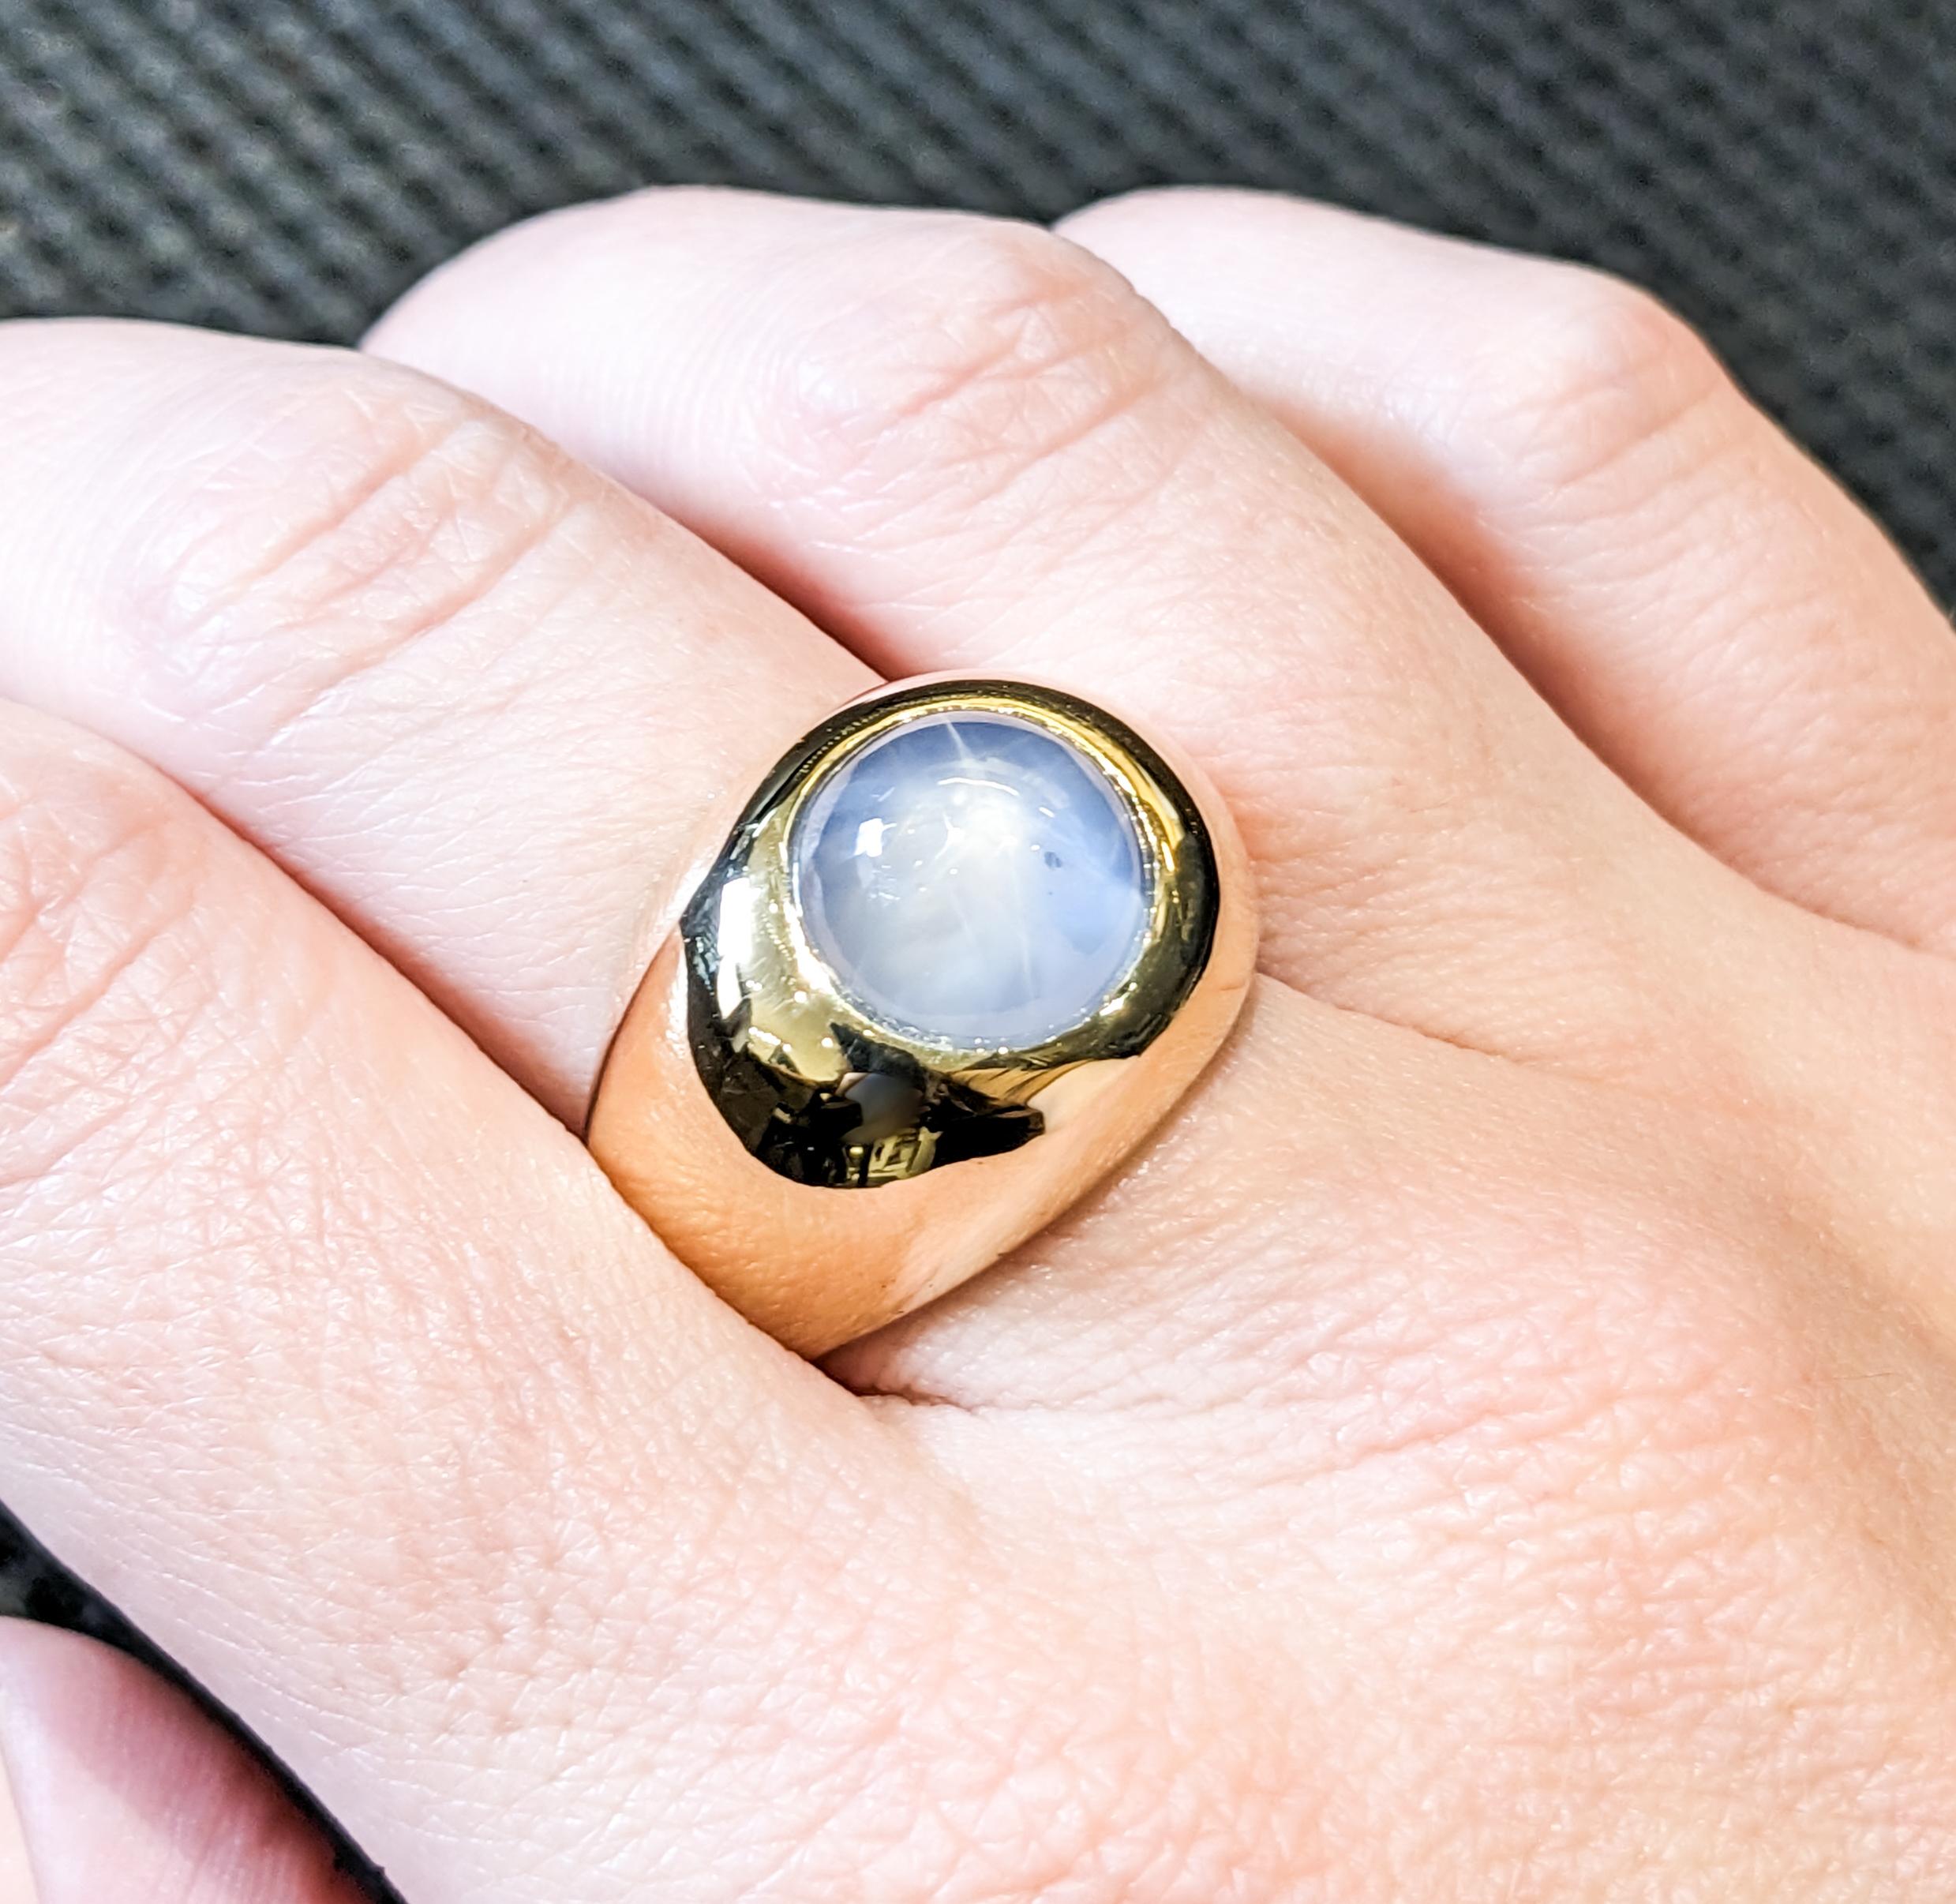 Spectacular Unheated Ceylon Star Sapphire Mens Ring

Discover timeless elegance embodied in this exceptional ring, masterfully crafted in 14k yellow gold. At its heart lies a magnificent 13.3ct cabochon Unheated Ceylon Star Sapphire, renowned for